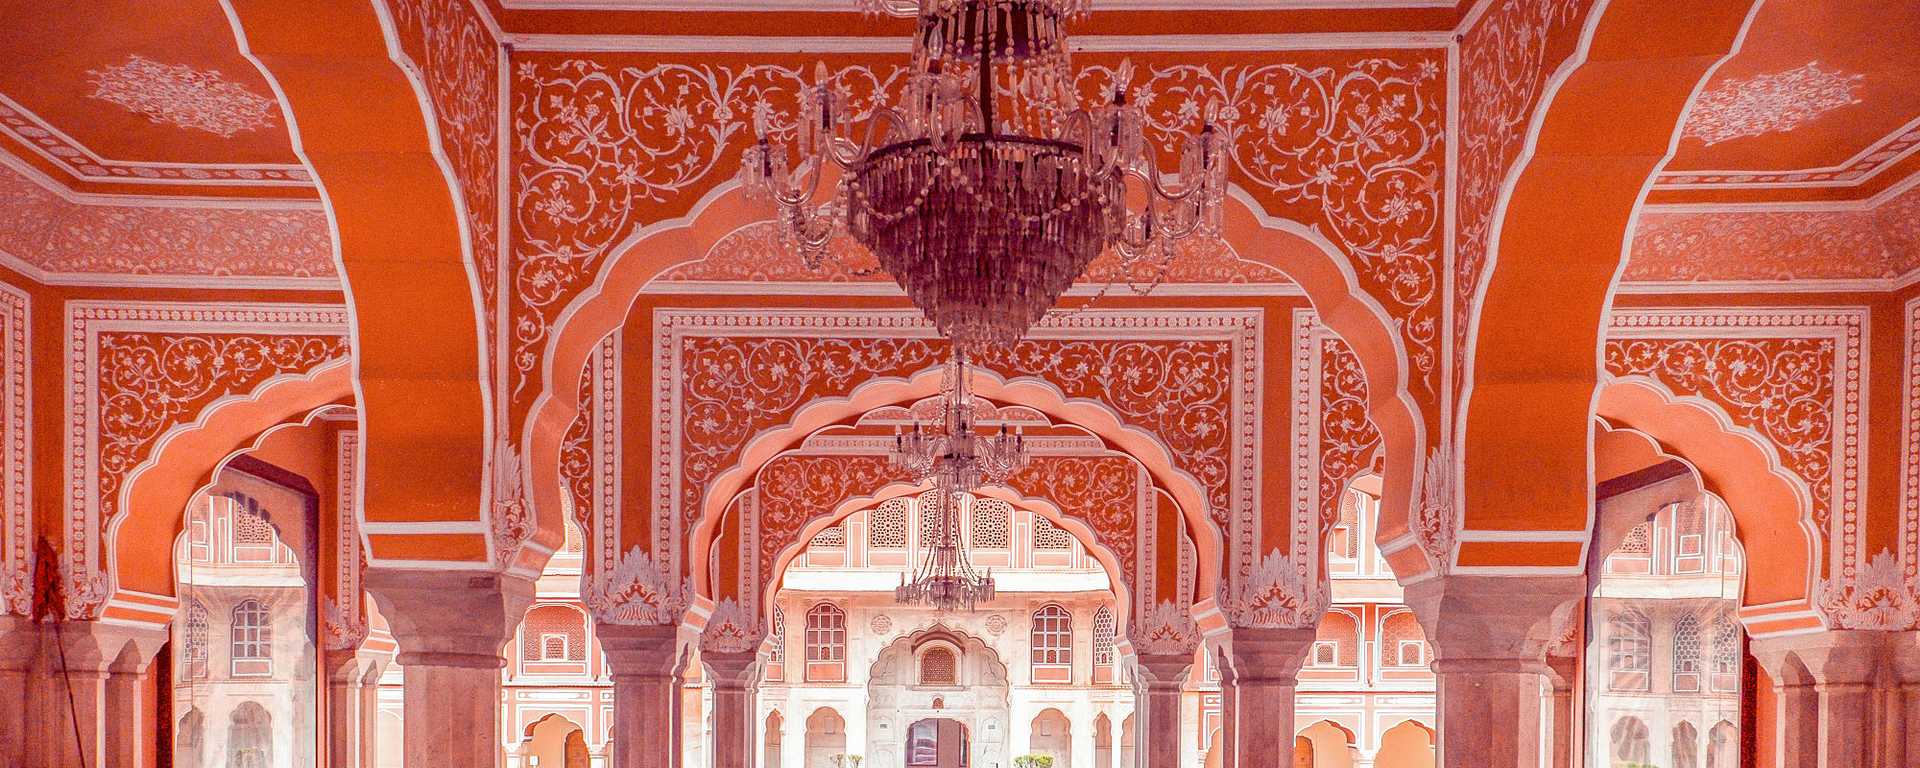 Interior arches of the Audience Hall at the City Palace in Jaipur, India